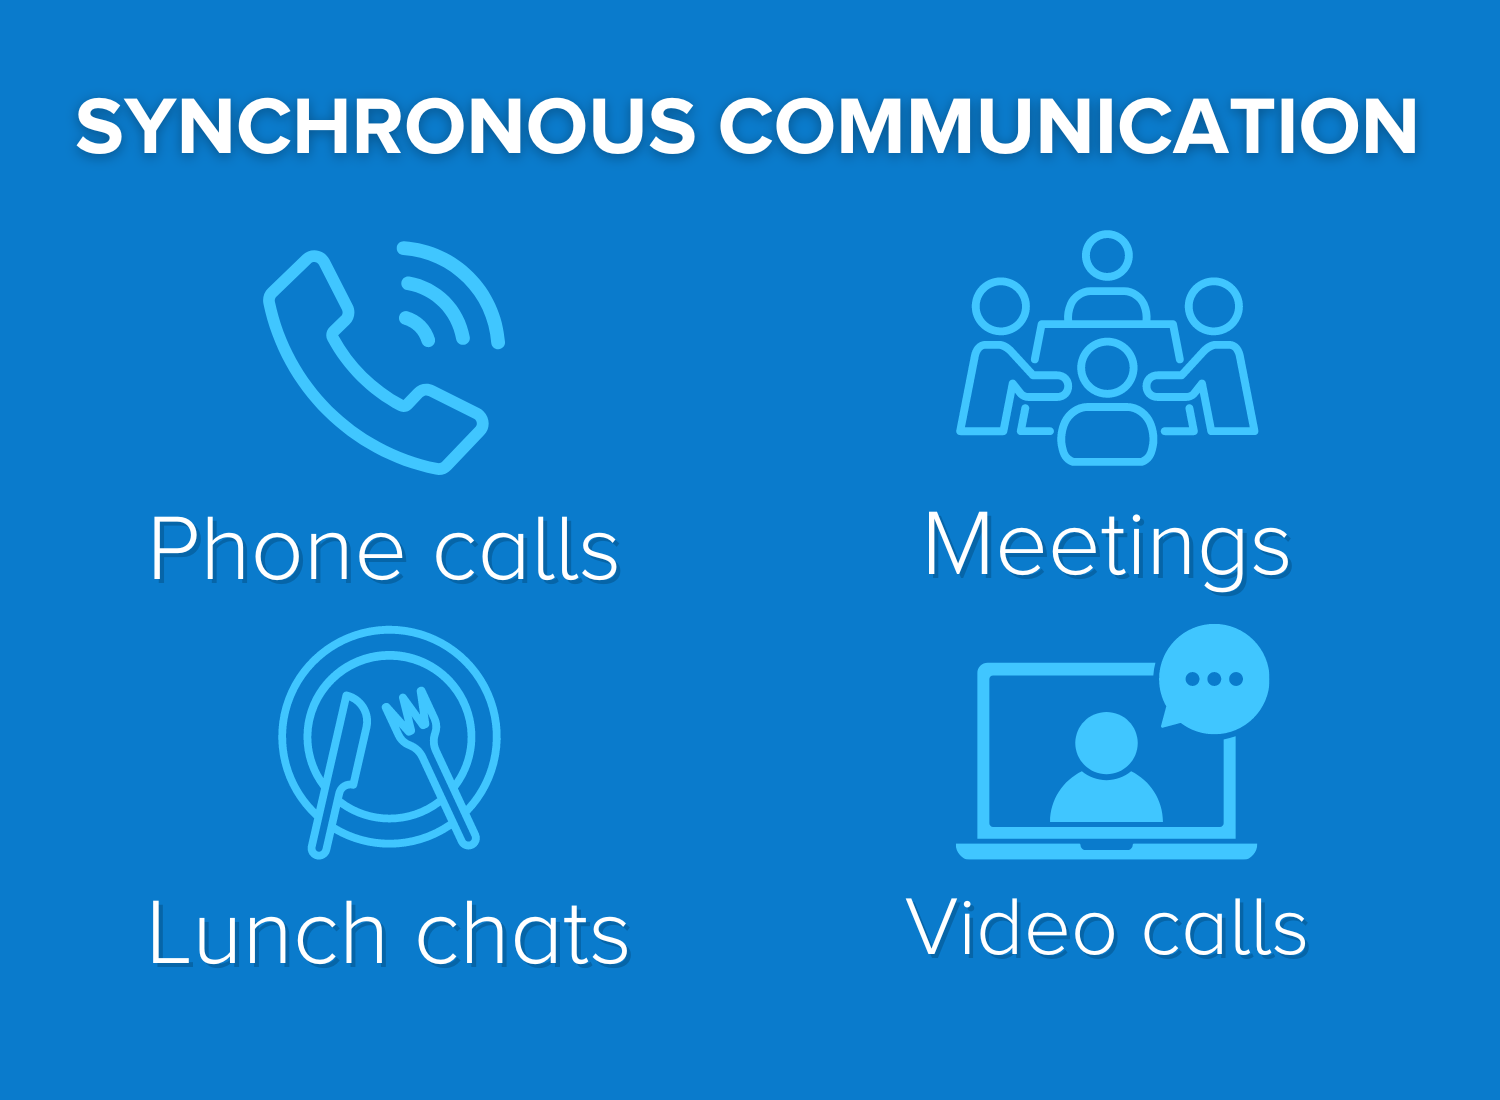 Types of sync communication: Phone calls, meetings, lunch chats, and video calls.